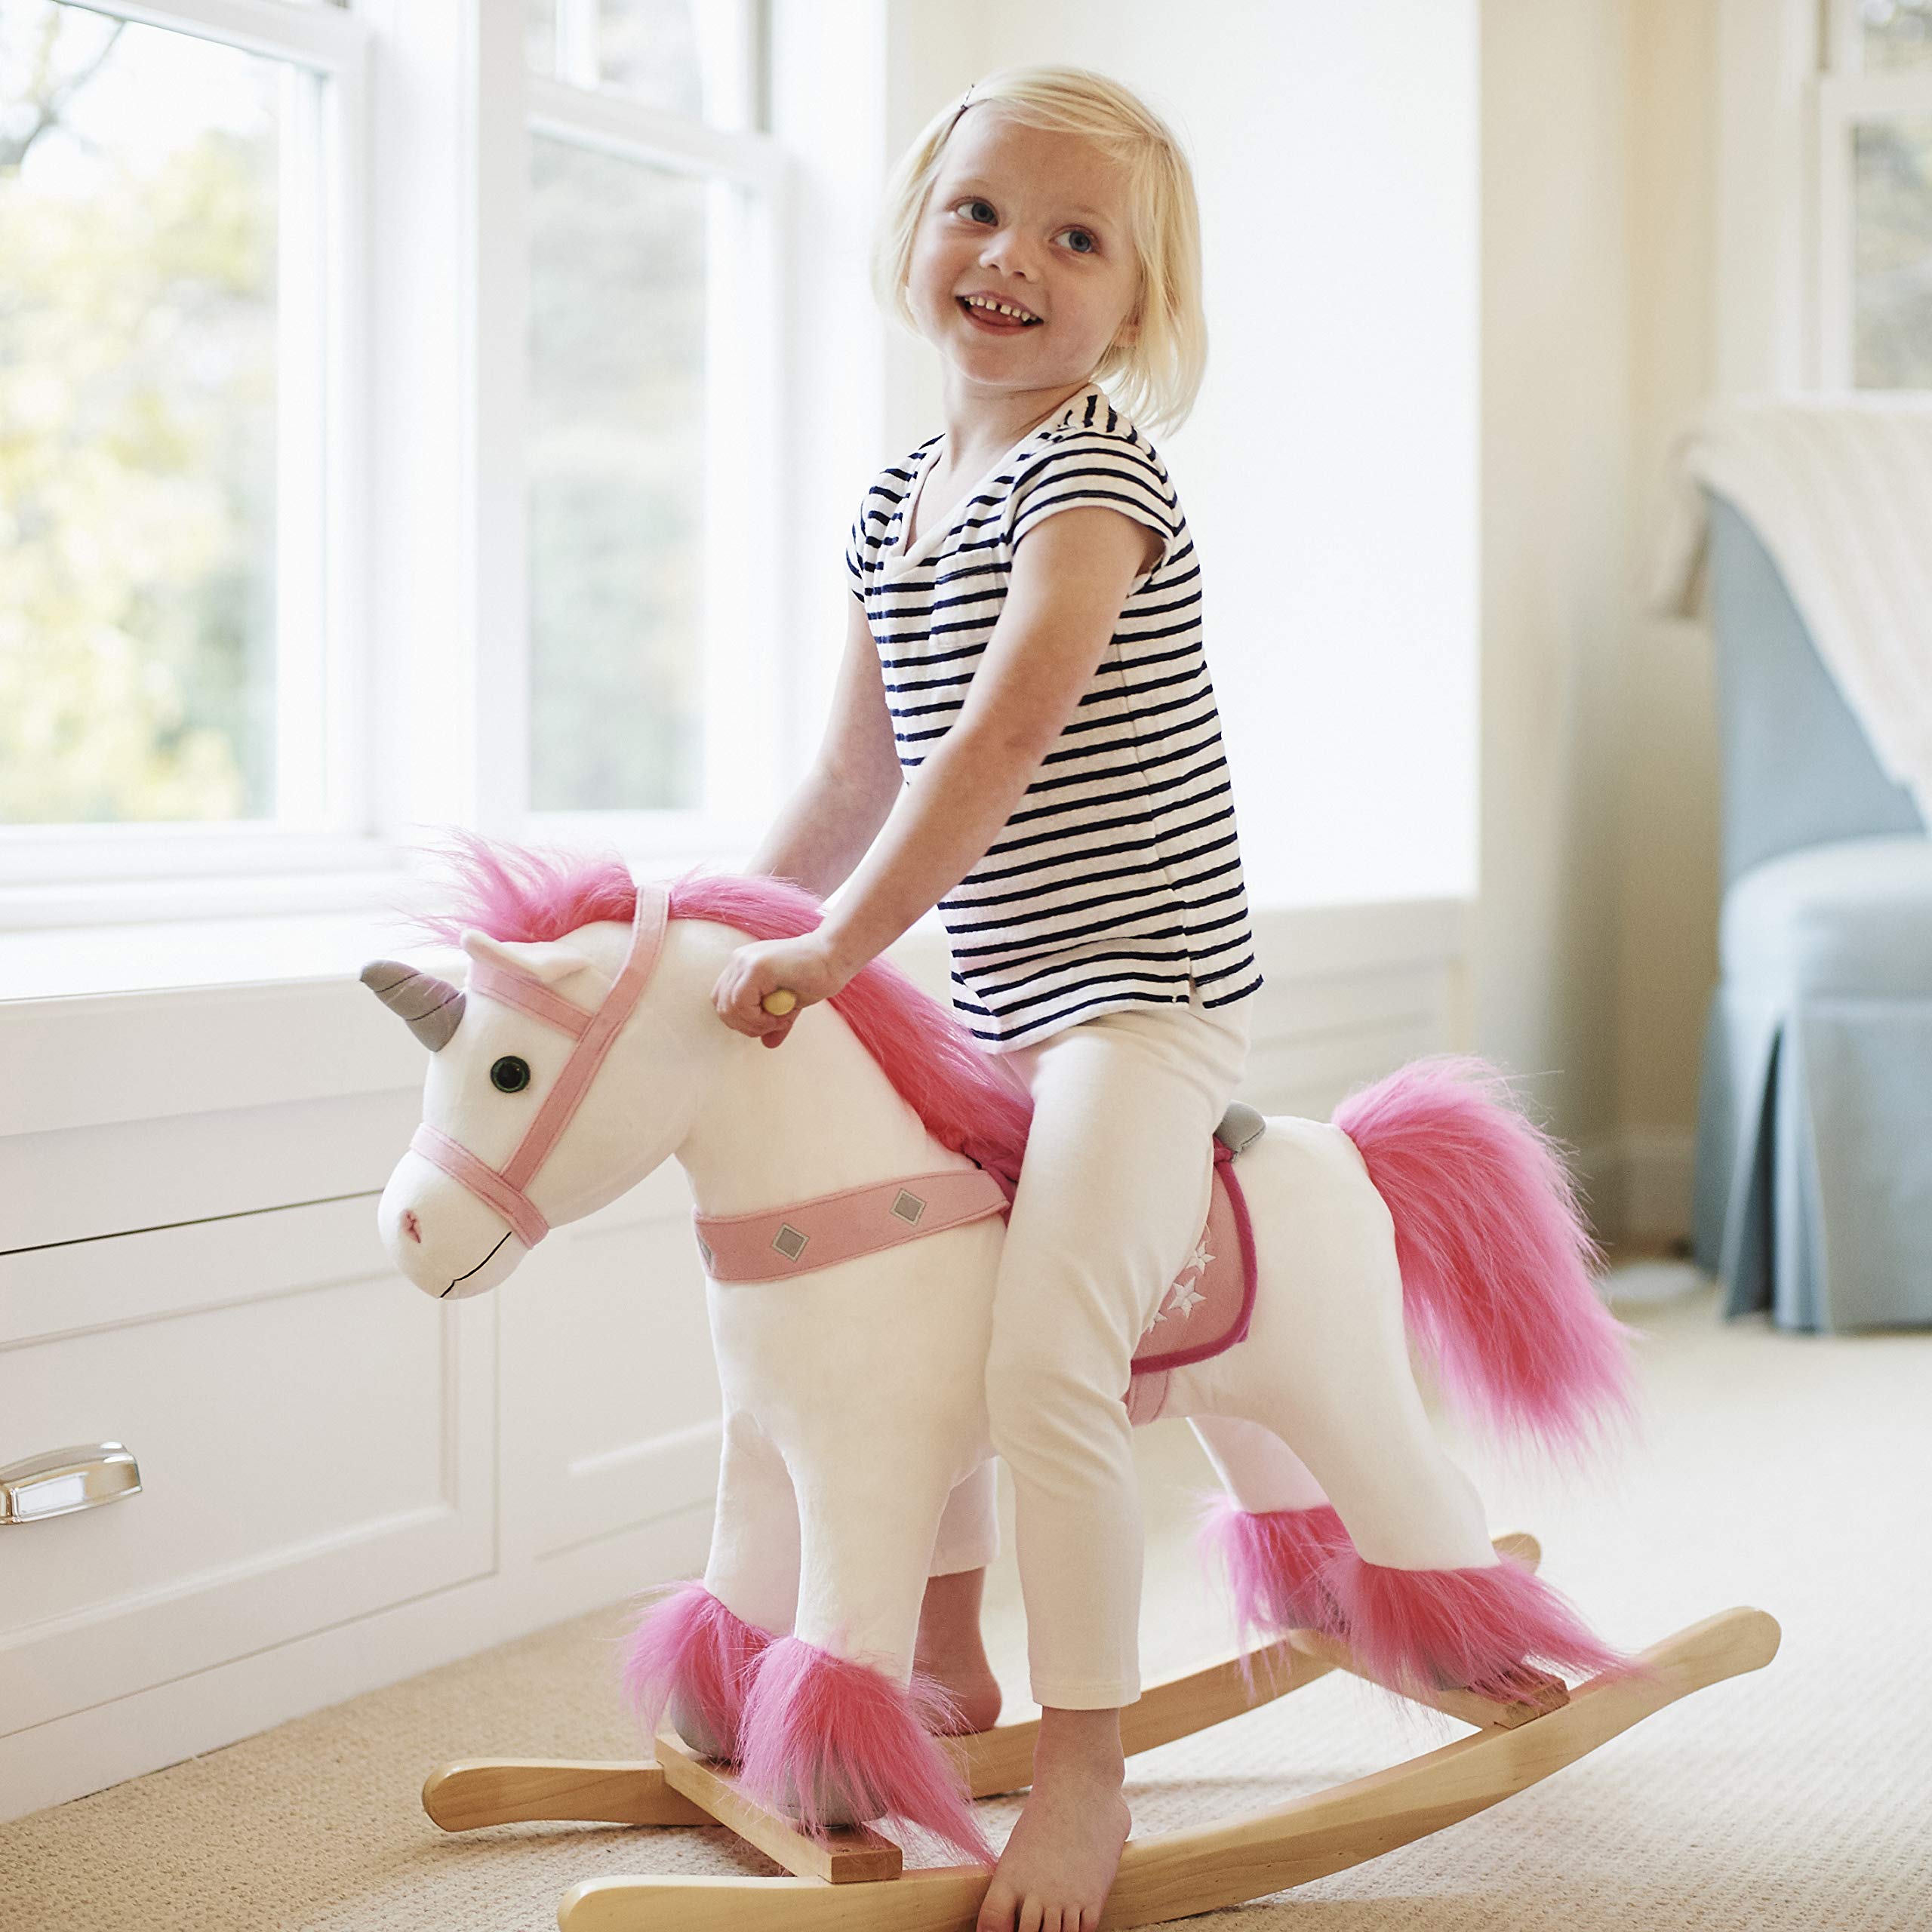 Animal Adventure | Real Wood Ride-On Plush Rocker | White and Pink Unicorn | Perfect for Ages 3+